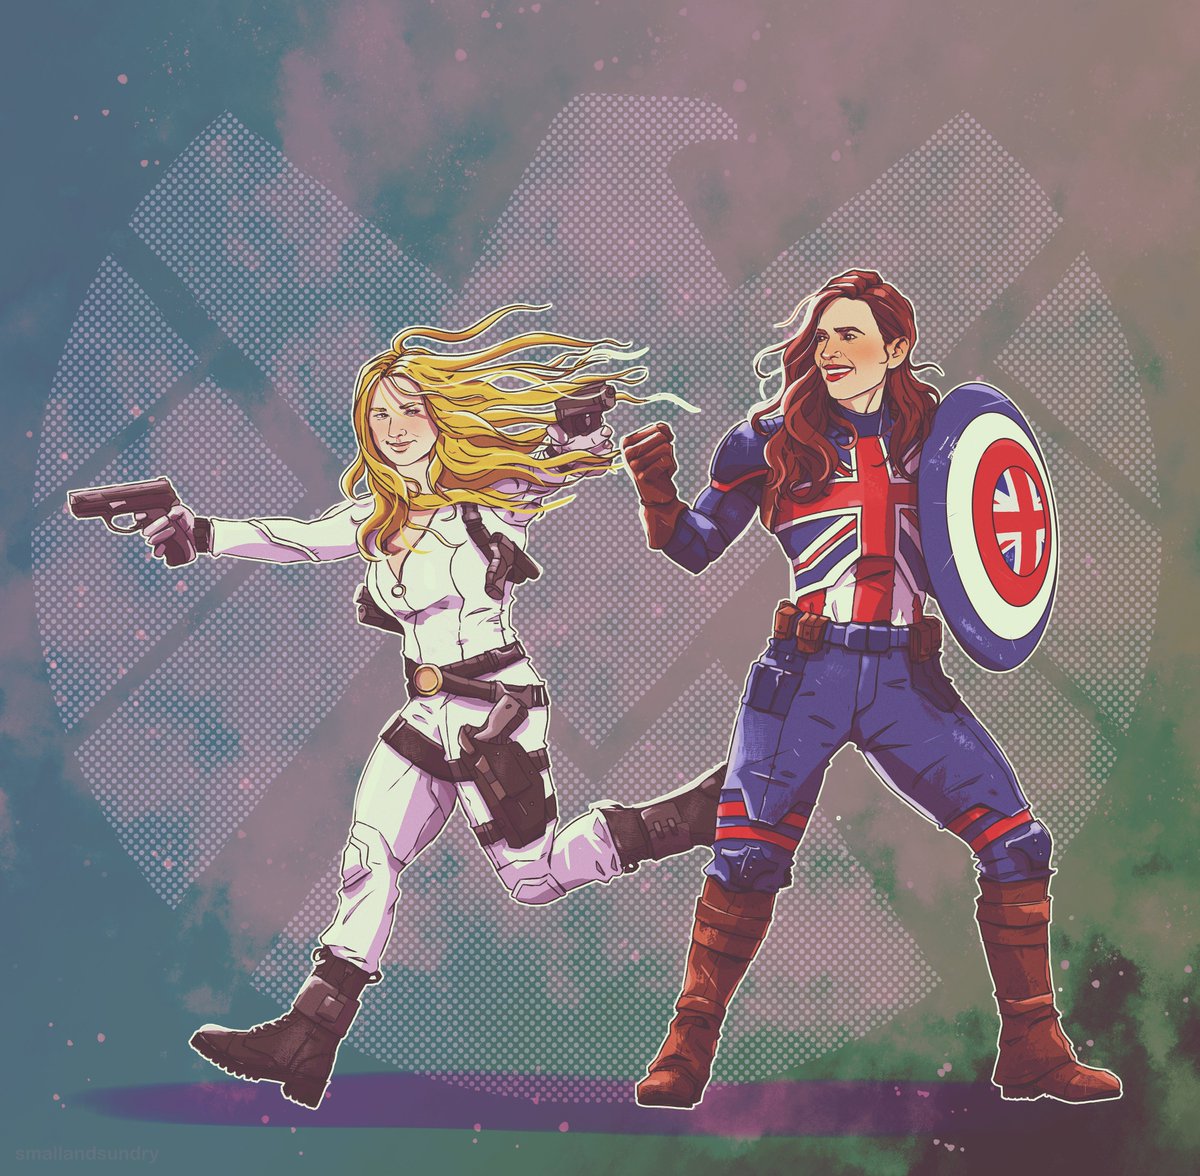 a carters commission from last year
#captaincarter #sharoncarter #peggycarter #MCU